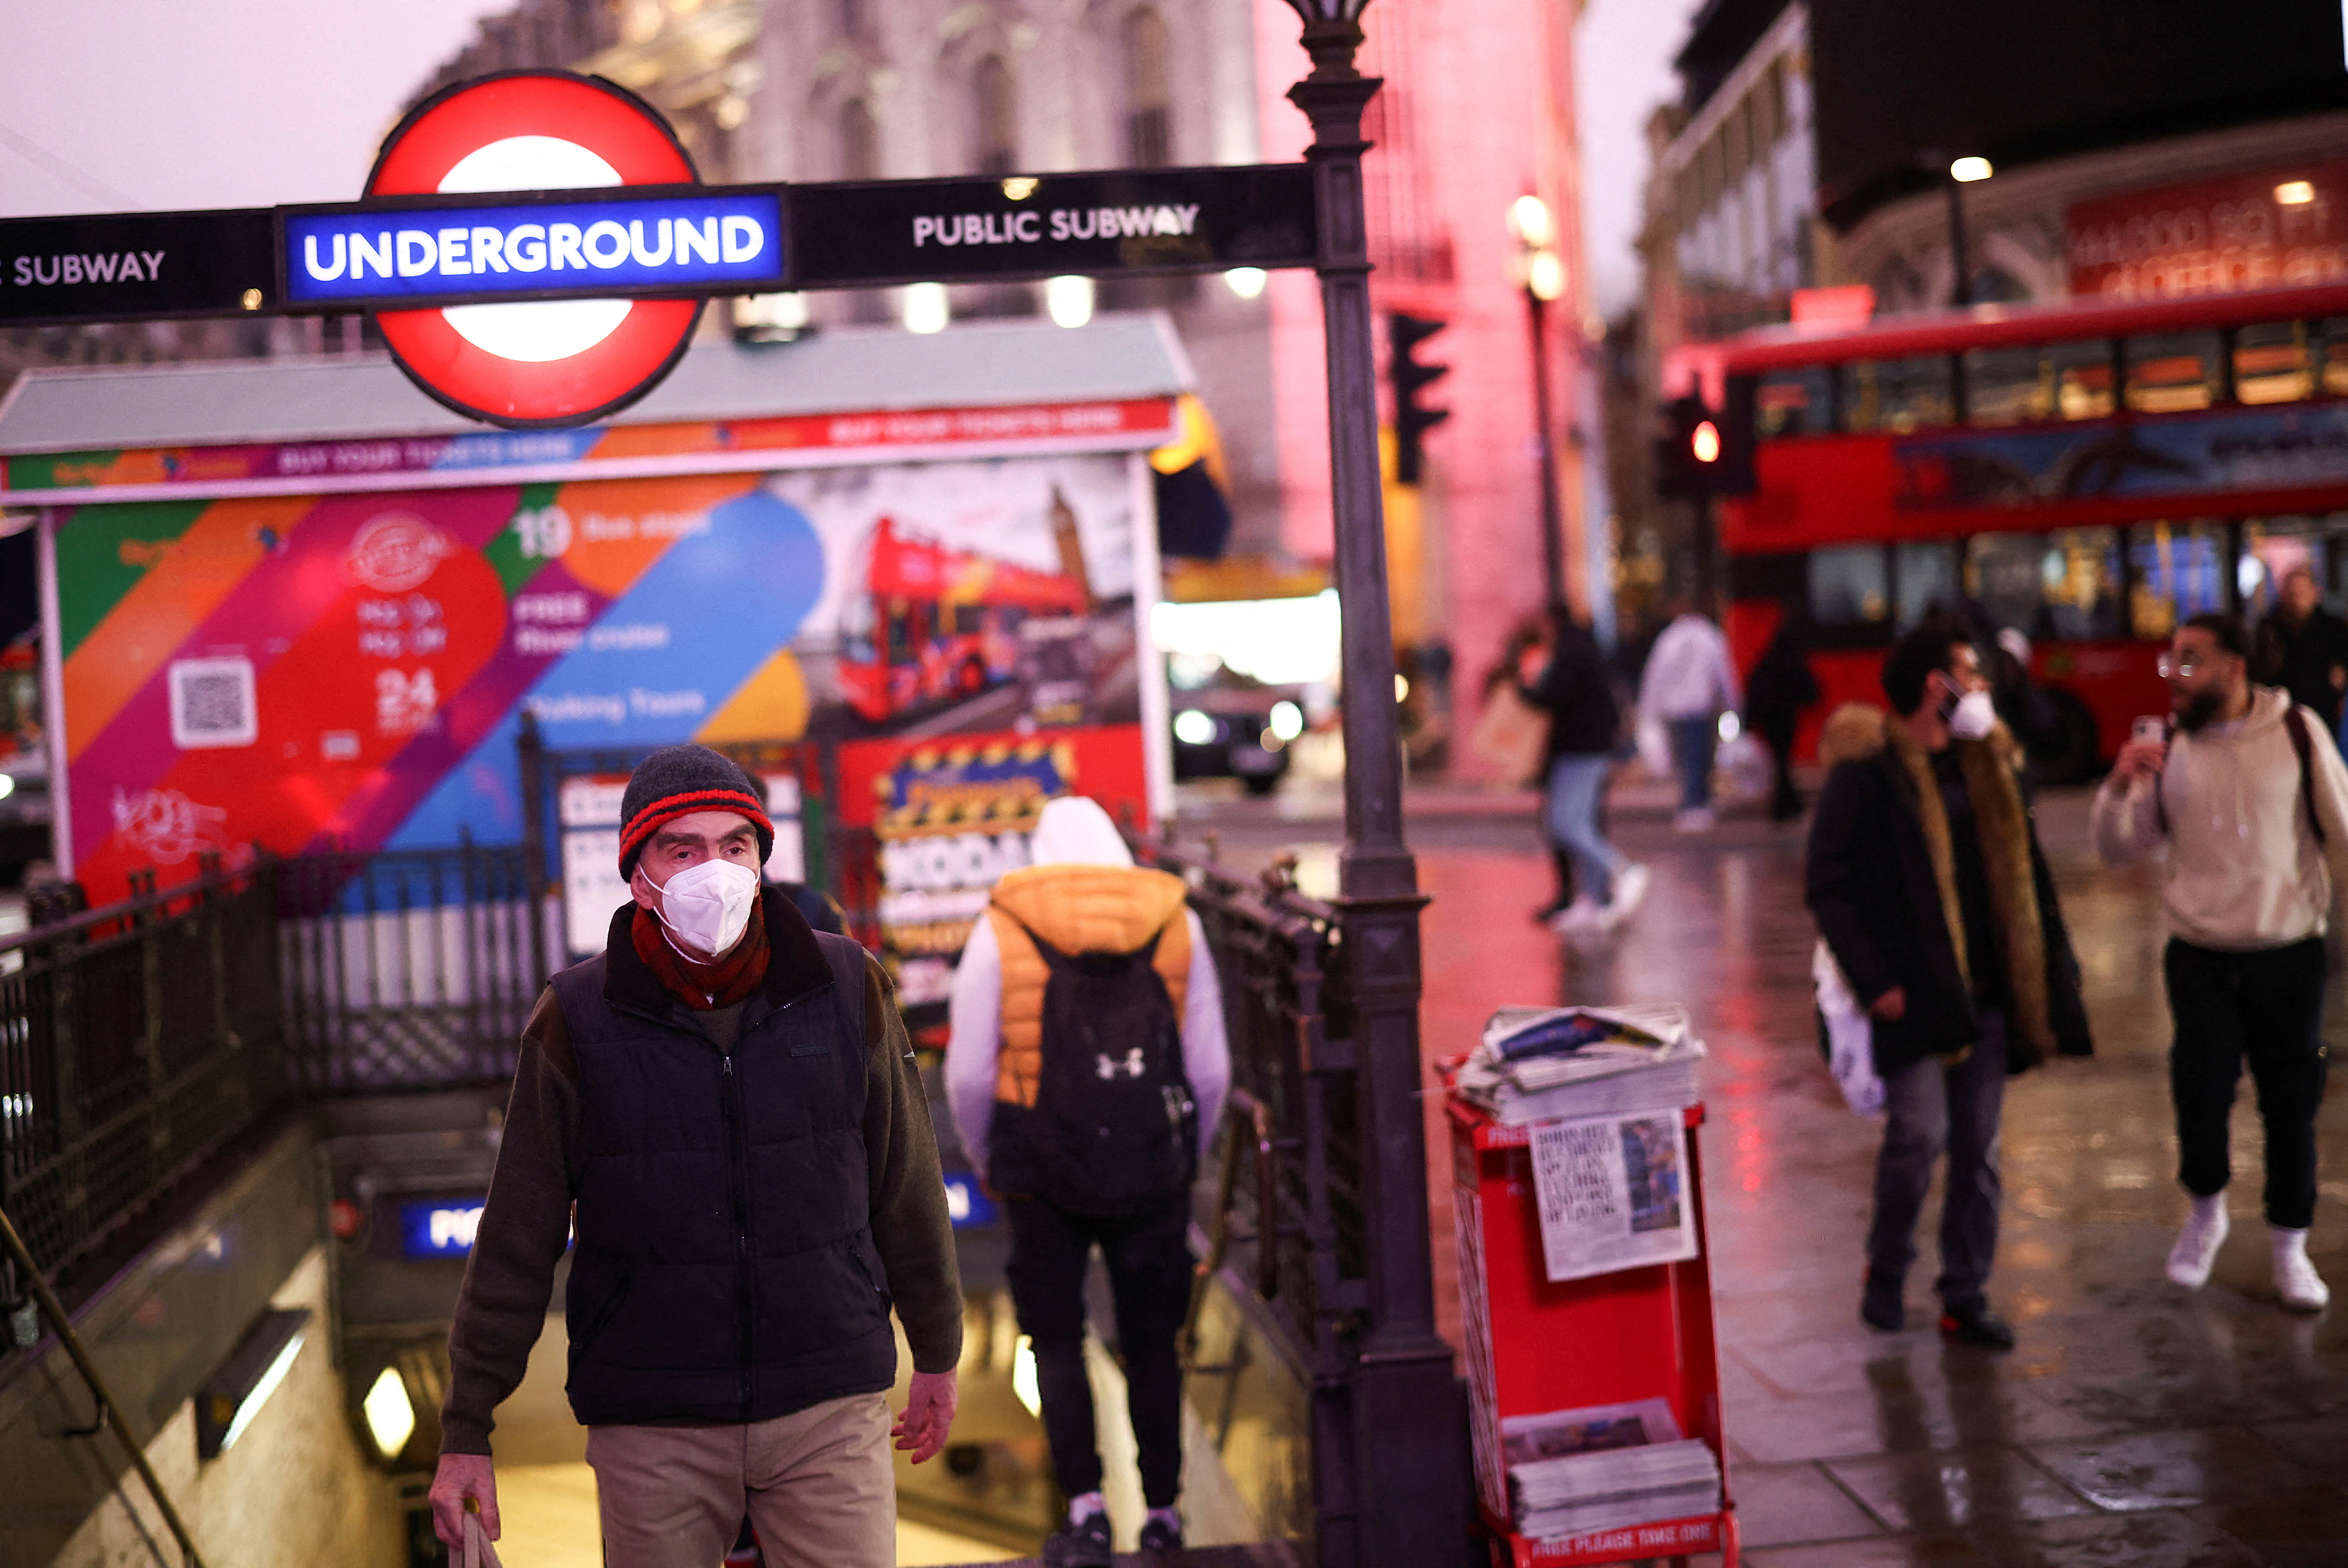 People exit Piccadilly Circus underground station, amid the coronavirus disease (COVID-19) outbreak, in central London